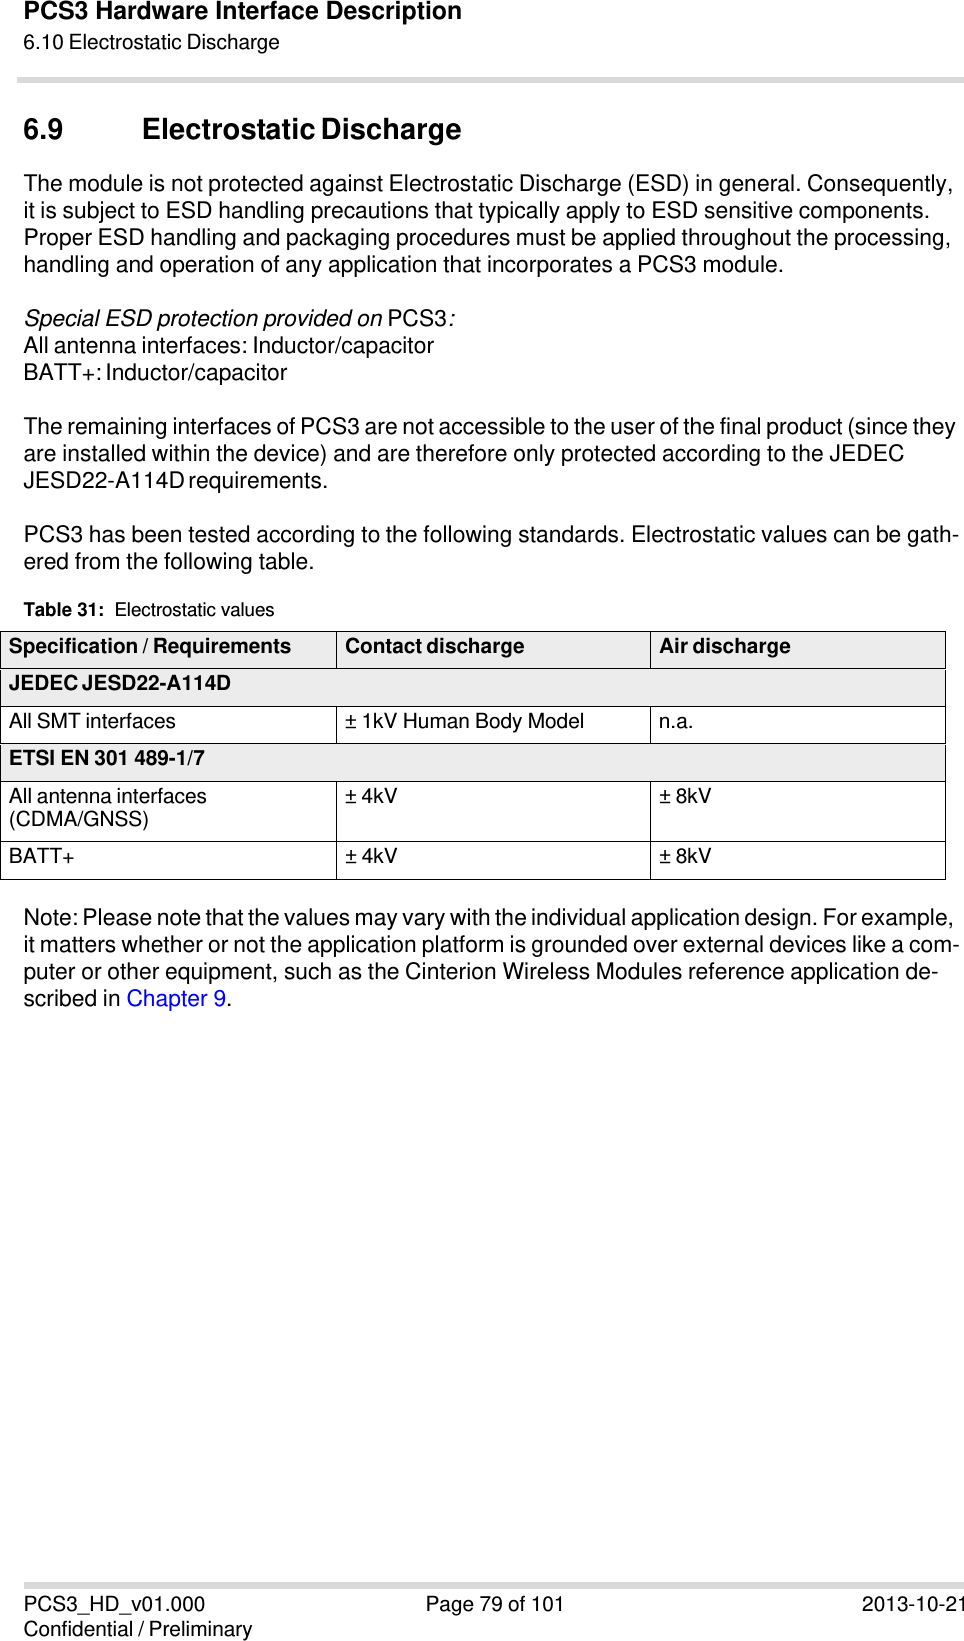 PCS3_HD_v01.000 Confidential / Preliminary Page 79 of 101 2013-10-21　PCS3 Hardware Interface Description6.10 Electrostatic Discharge 6.9 Electrostatic Discharge The module is not protected against Electrostatic Discharge (ESD) in general. Consequently, it is subject to ESD handling precautions that typically apply to ESD sensitive components. Proper ESD handling and packaging procedures must be applied throughout the processing, handling and operation of any application that incorporates a PCS3 module. Special ESD protection provided on PCS3: All antenna interfaces: Inductor/capacitor BATT+: Inductor/capacitor The remaining interfaces of PCS3 are not accessible to the user of the final product (since they are installed within the device) and are therefore only protected according to the JEDEC JESD22-A114D requirements. PCS3 has been tested according to the following standards. Electrostatic values can be gath- ered from the following table. Table 31:  Electrostatic values Specification / Requirements Contact discharge Air discharge JEDEC JESD22-A114D All SMT interfaces  ± 1kV Human Body Model  n.a. ETSI EN 301 489-1/7 All antenna interfaces (CDMA/GNSS)  ± 4kV  ± 8kV BATT+  ± 4kV  ± 8kV Note: Please note that the values may vary with the individual application design. For example, it matters whether or not the application platform is grounded over external devices like a com- puter or other equipment, such as the Cinterion Wireless Modules reference application de- scribed in Chapter 9. 